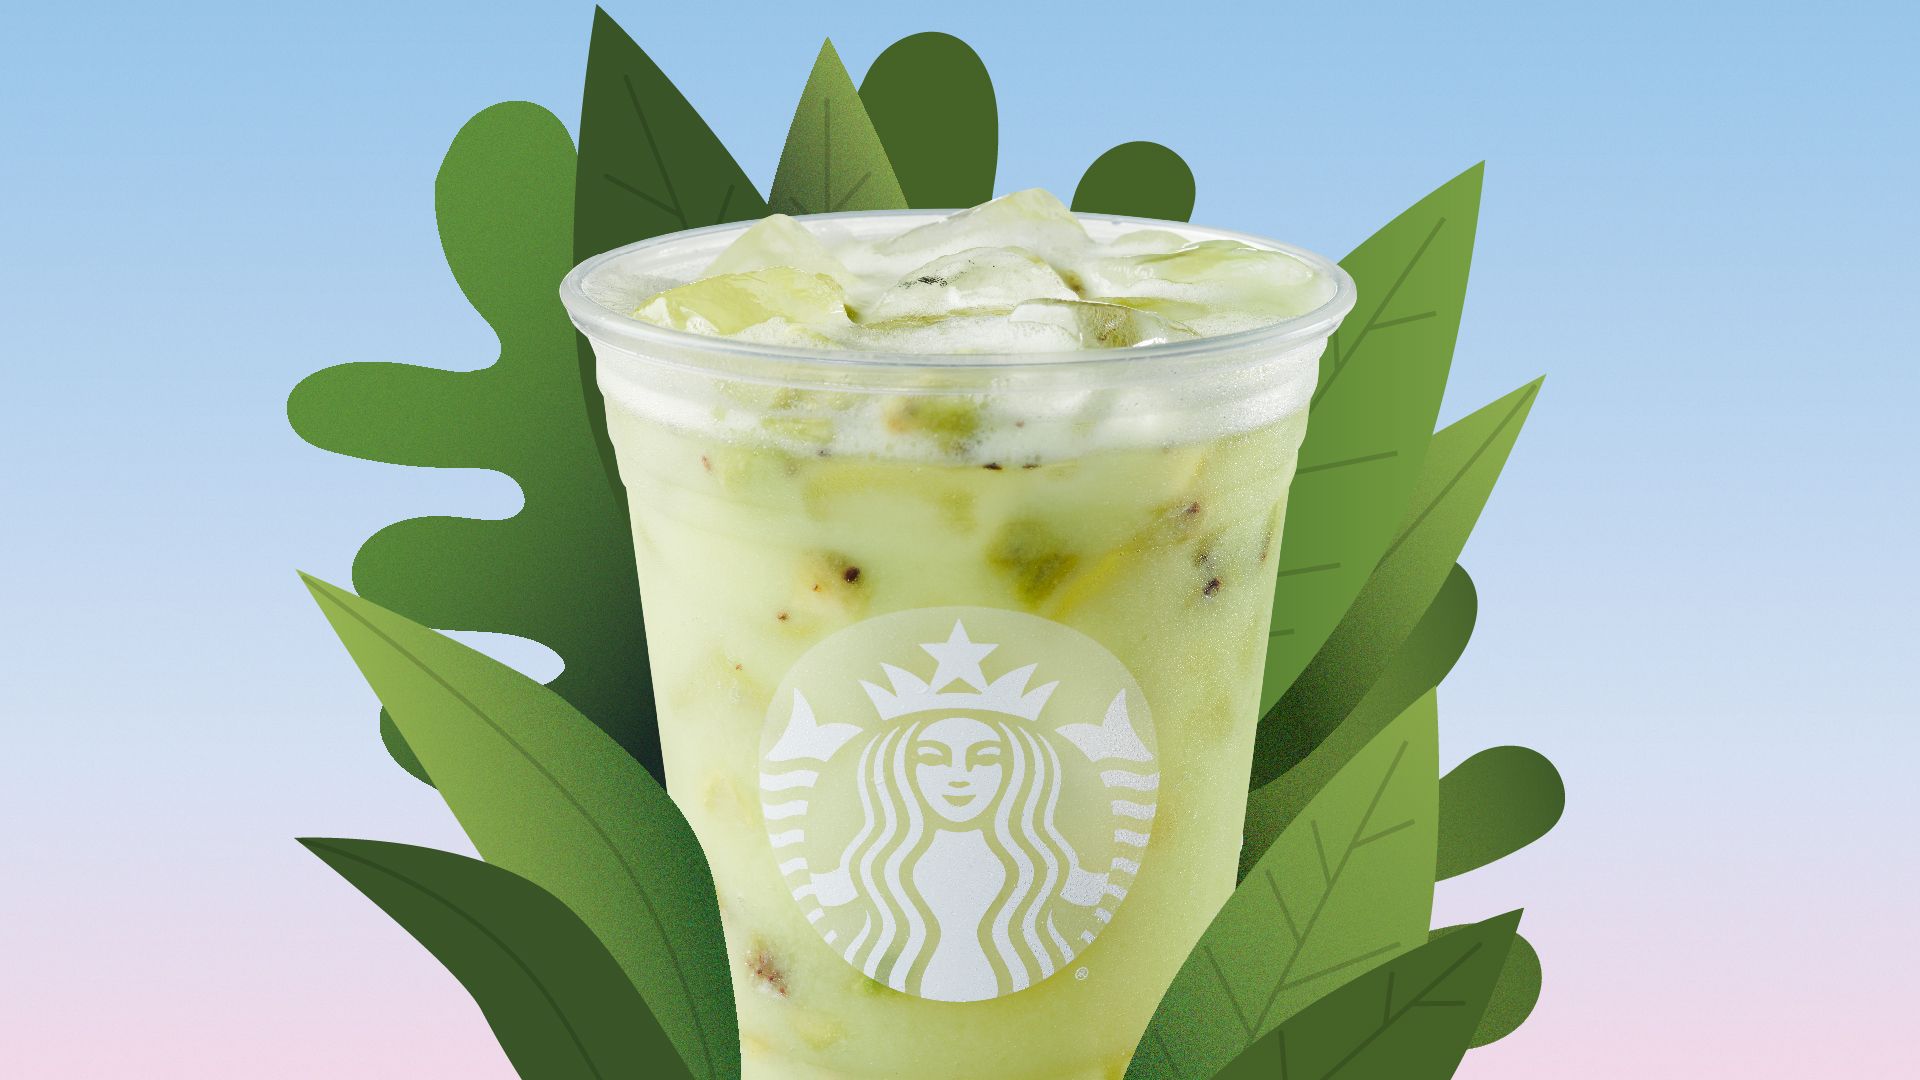 Starbucks introduces two new tropical green drinks to mark the end of summer